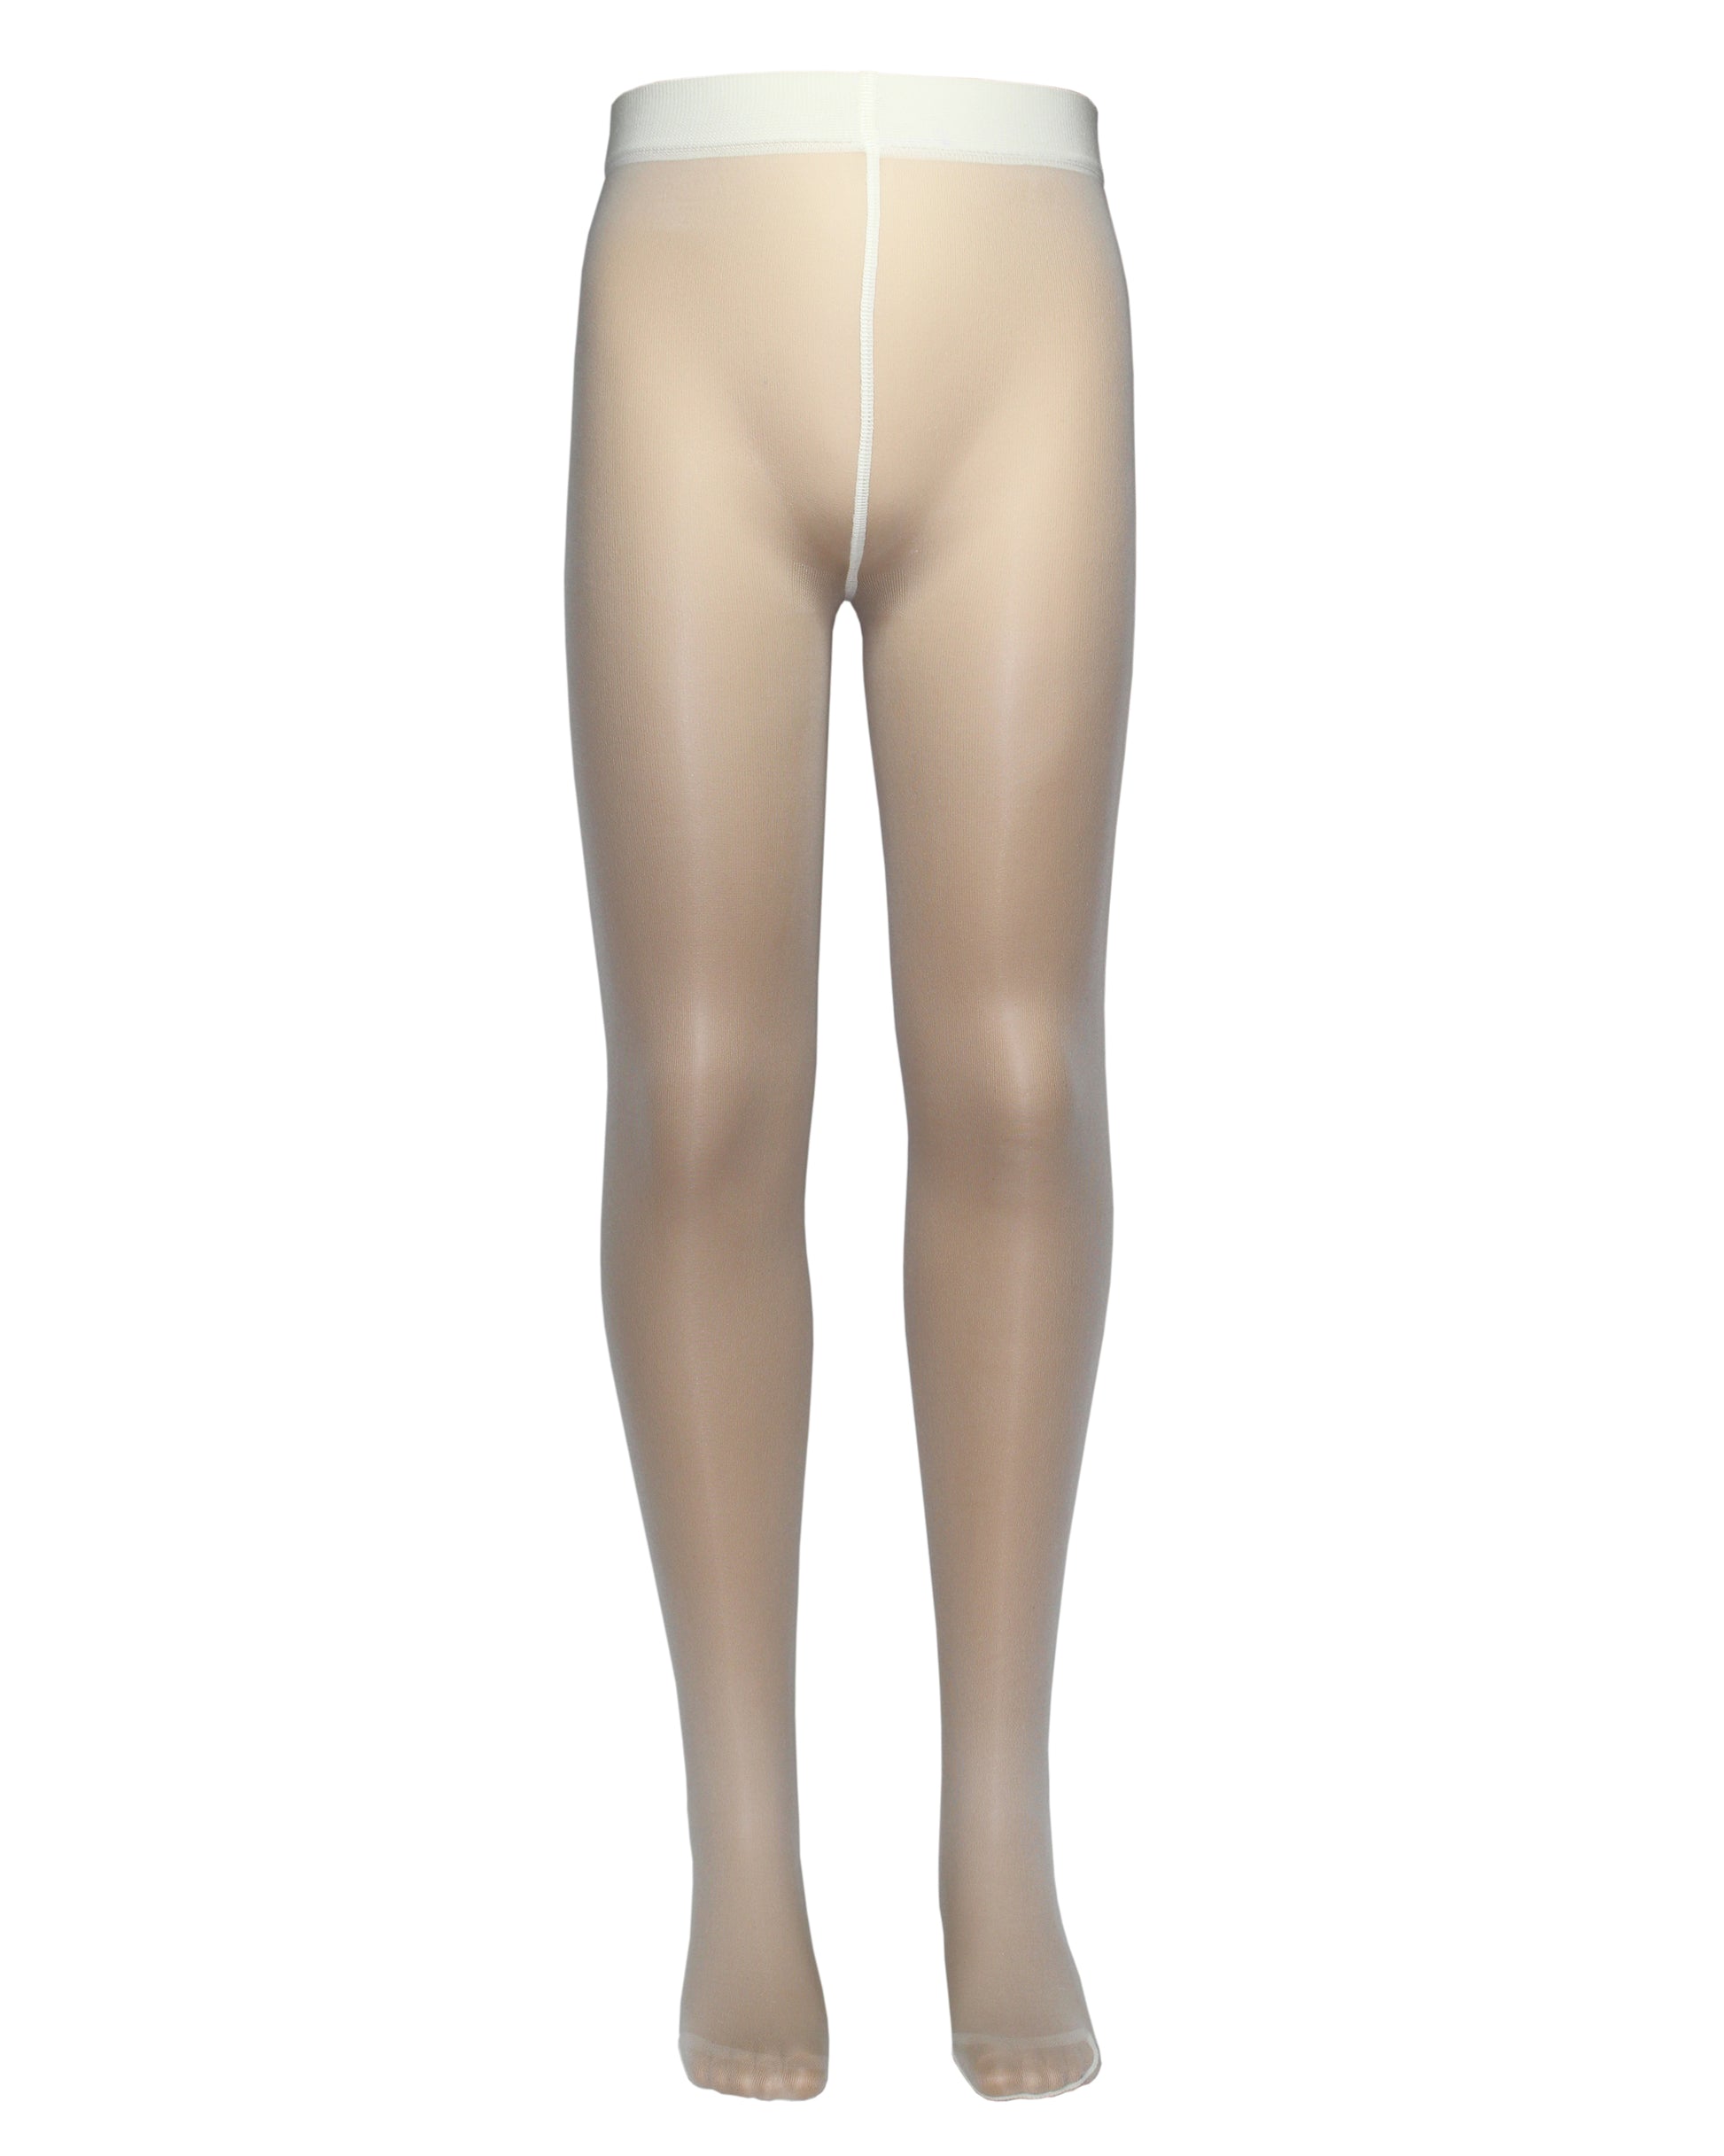 Omsa MiniVelour 40 Tights - Cream / ivory soft and matte opaque plain kid's tights perfect for communions and wedding flower girls.